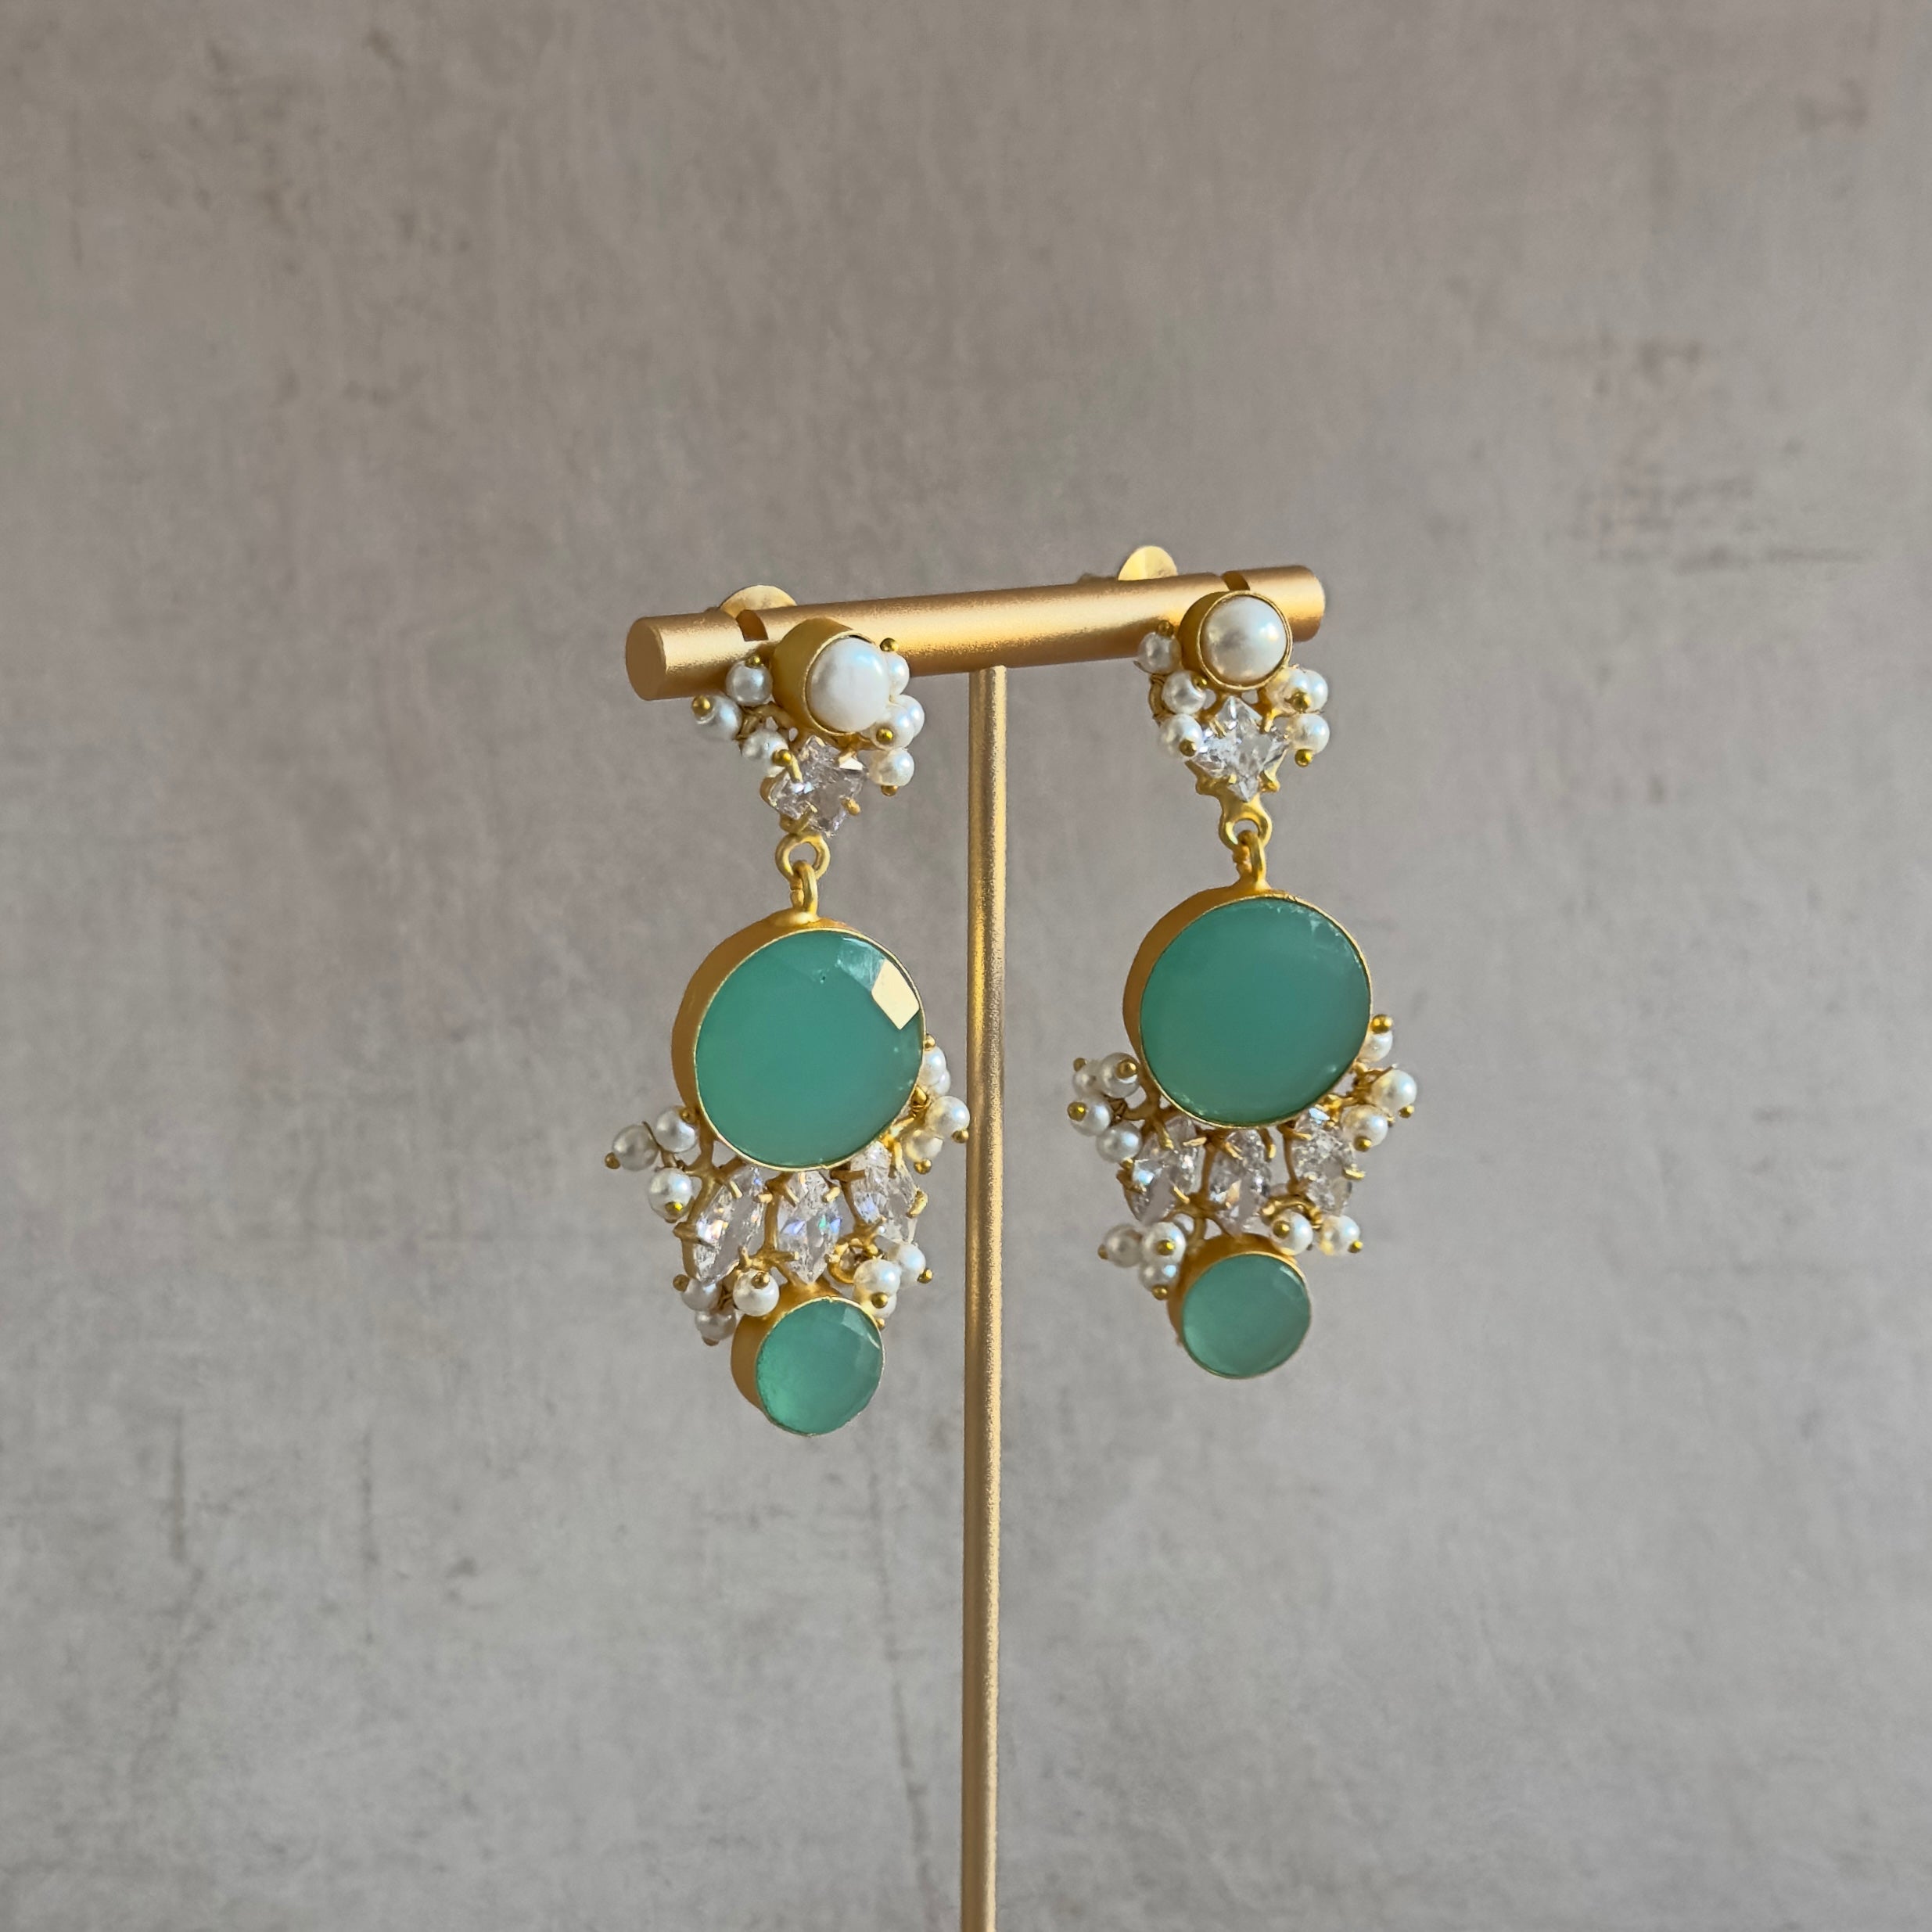 Indulge in the stunning beauty of our Dina Earrings! The vibrant aqua green hue will add a pop of color to any outfit, while the delicate pearl accent and sparkling CZ crystals bring a touch of elegance. Elevate your style and turn heads with these must-have earrings!